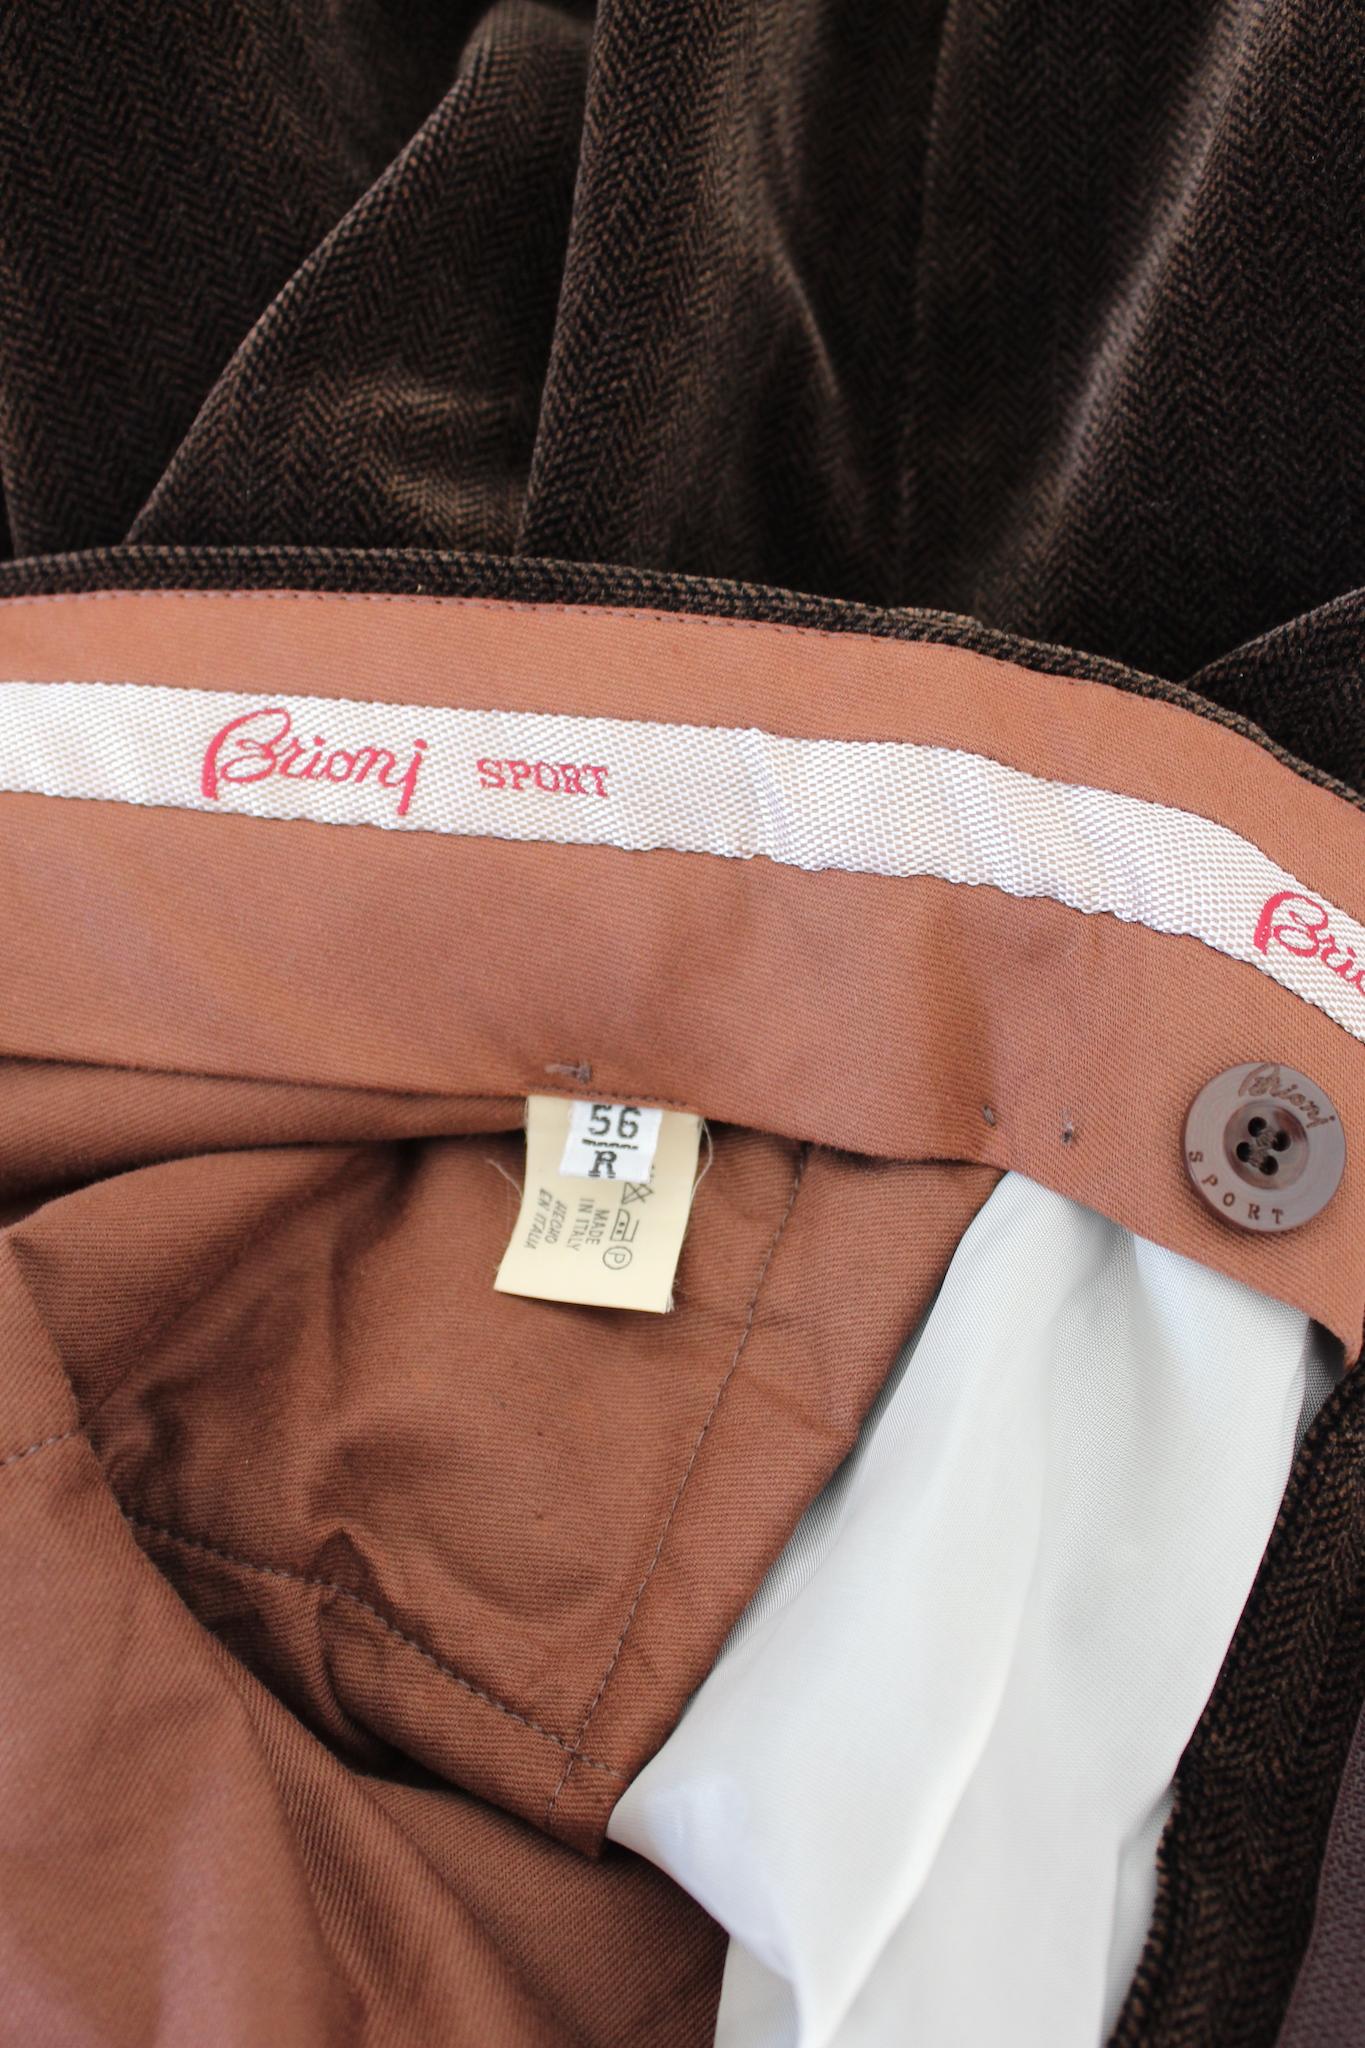 Brioni classic vintage 90s trousers. Brown color, soft velvet fabric, 100% cotton. Raw cut hem that can be changed according to height. Made in Italy.

Size: 56 IT 46 Us 46 Uk

Waist: 46 cm
Length: 120 cm
Hem: 21 cm
Crotch: 95 cm
